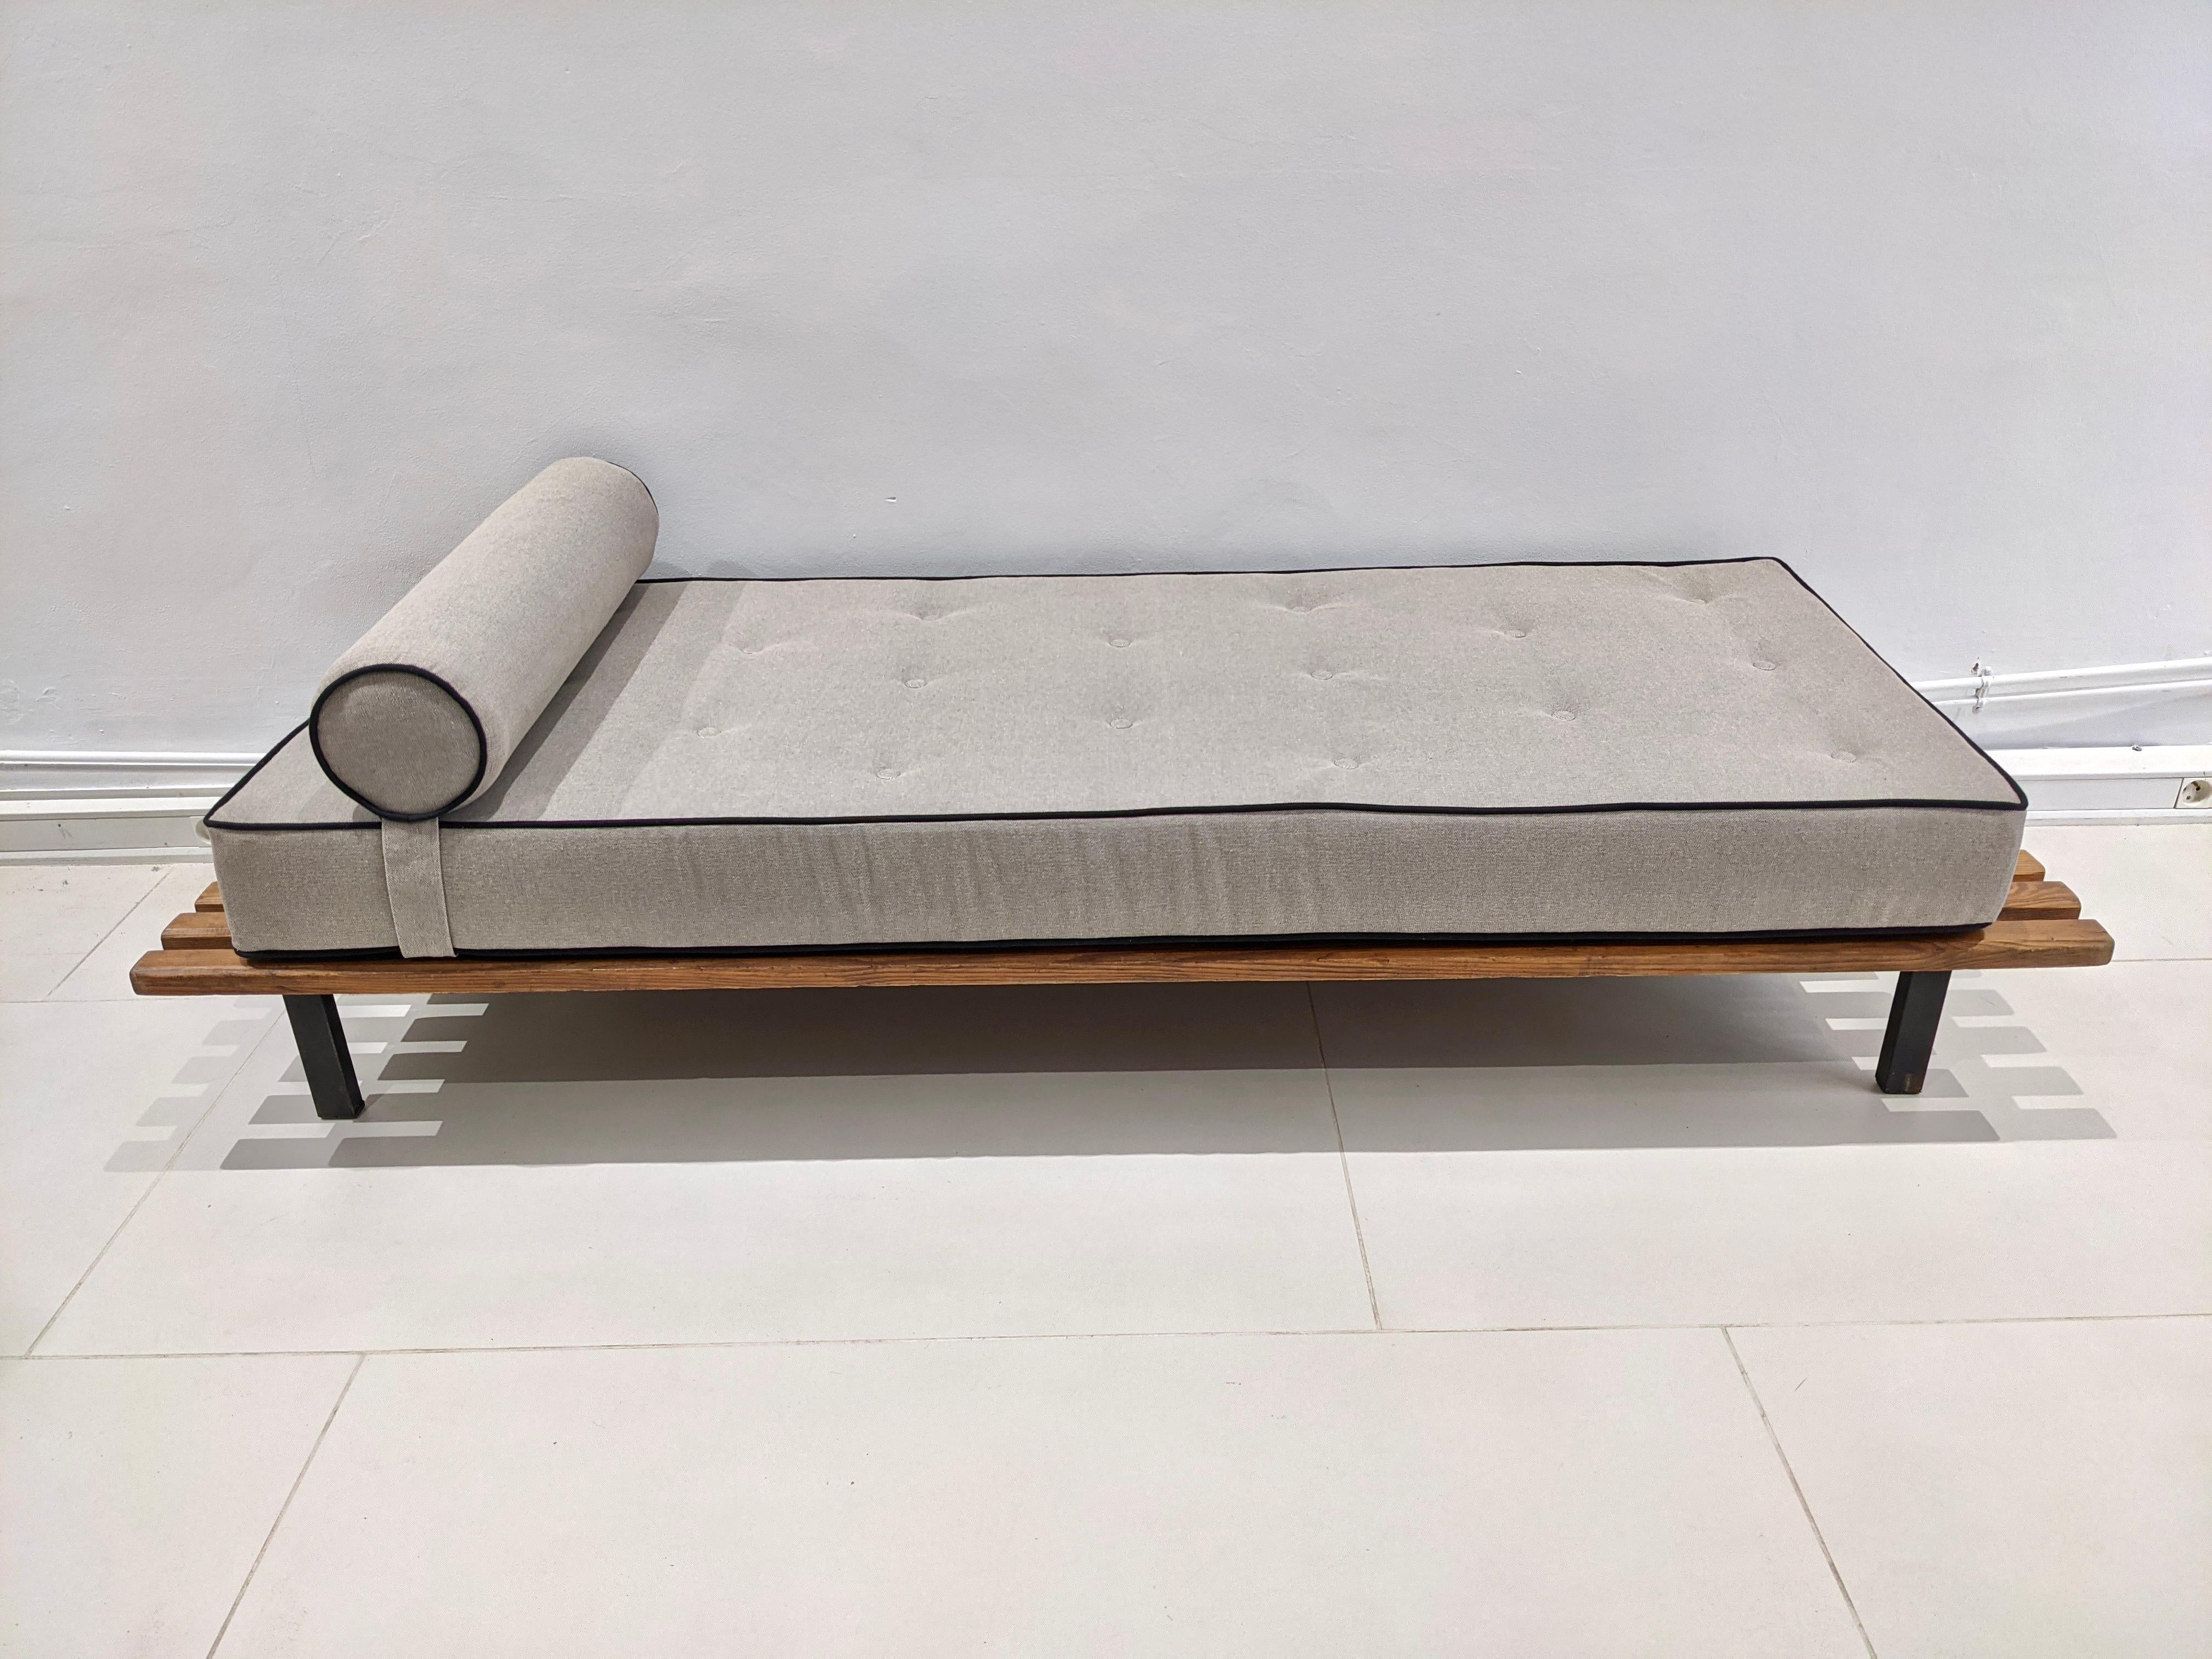 Cansado bench in larch tree by Charlotte Perriand. Year 1954. Edition Steph Simon. Mattress and cushion in grey and black fabric. Very good general condition. 

Provenance: Cansado mining town, Mauritania, Africa.